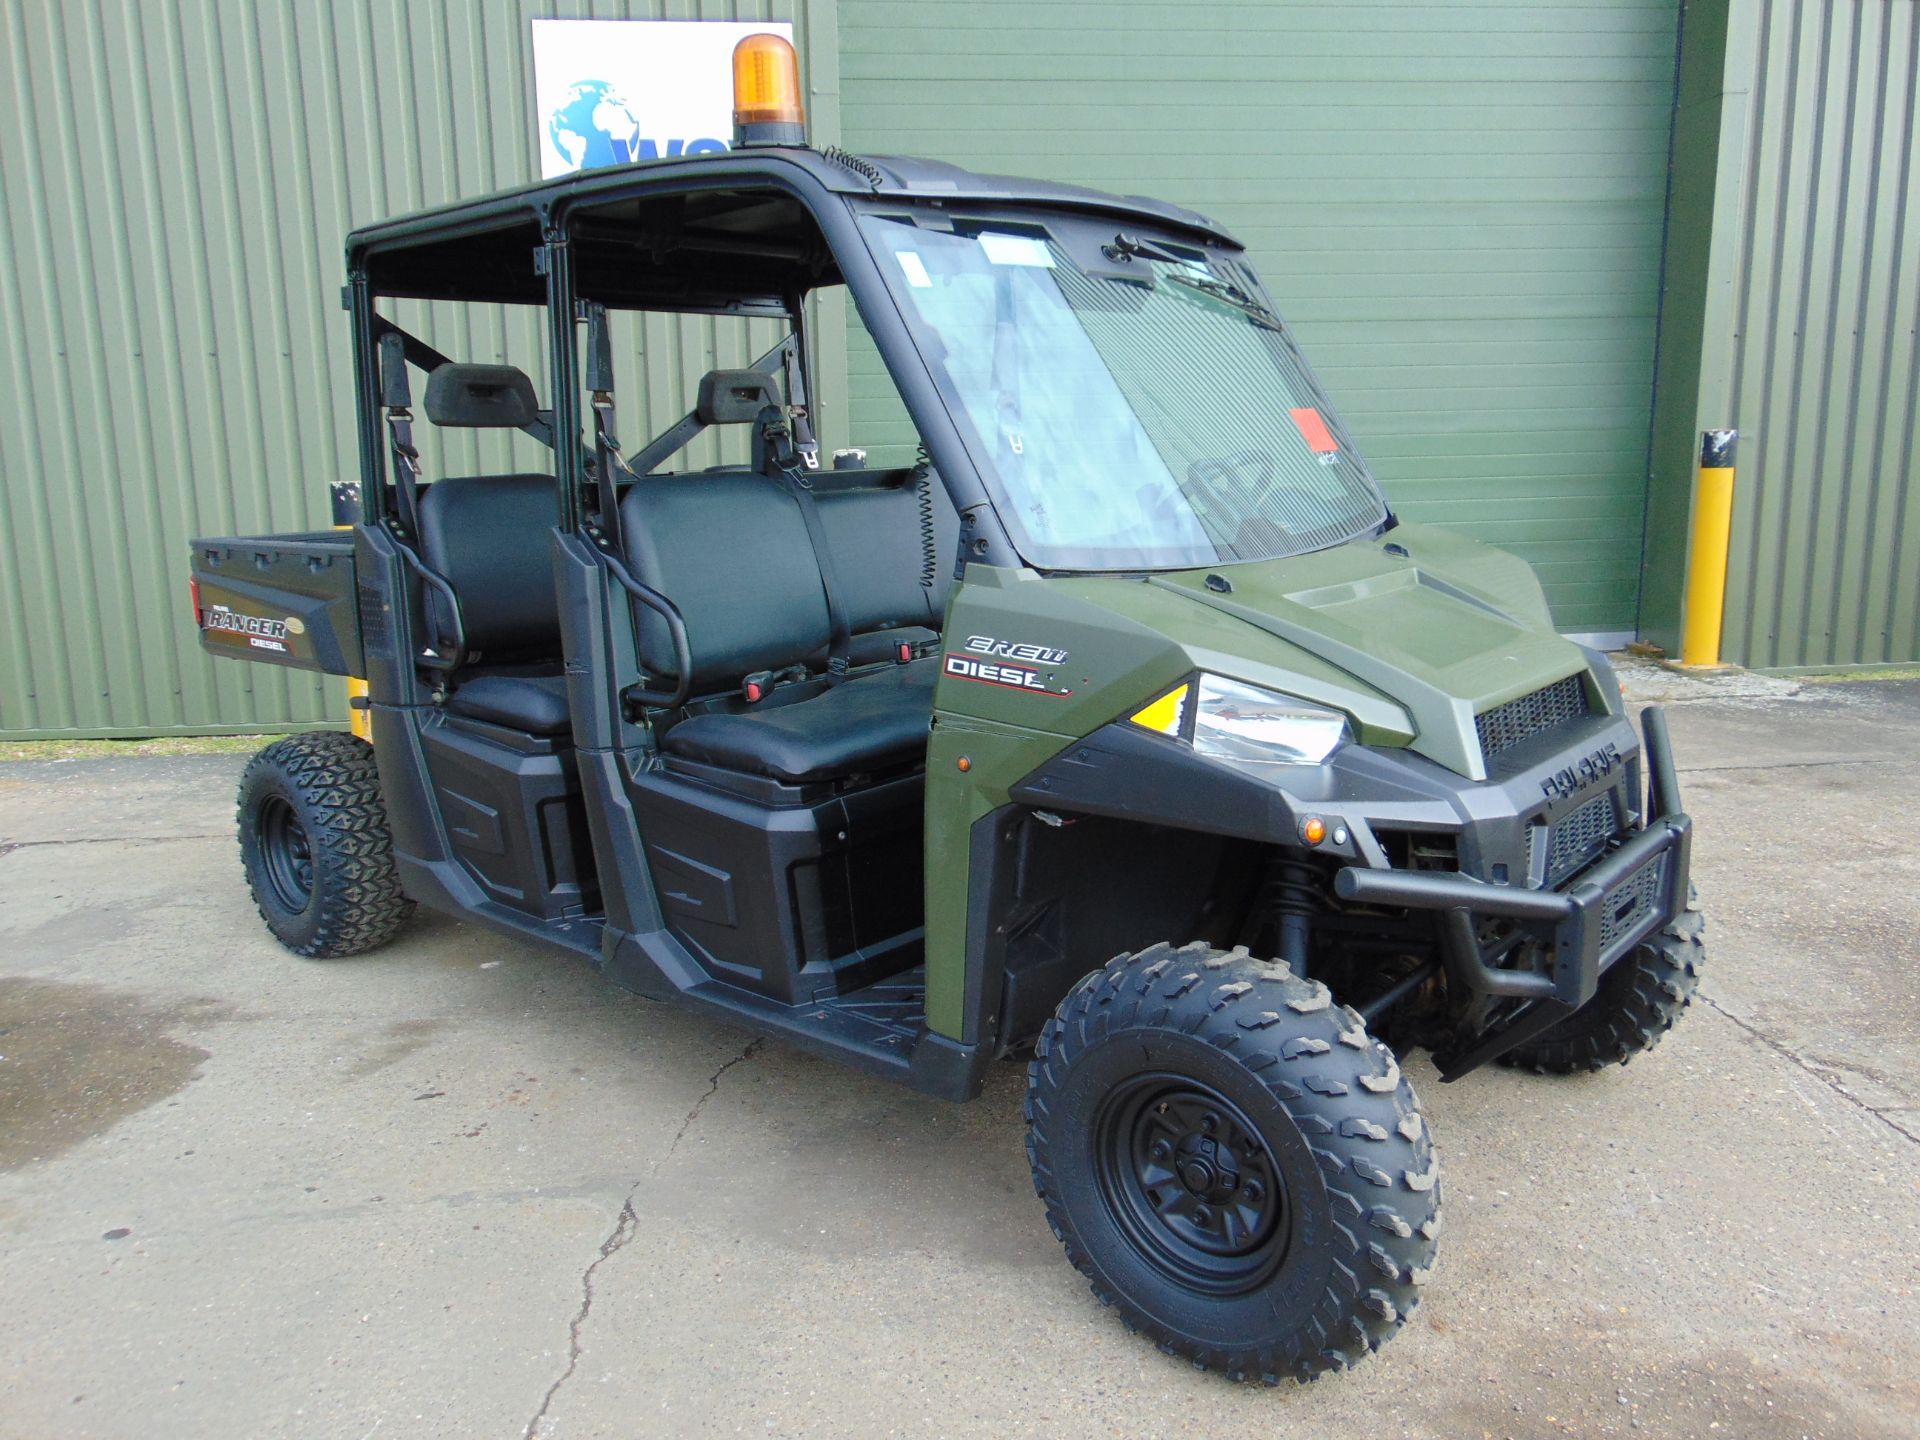 Polaris Ranger Crew Cab Diesel Utility Vehicle 1,190 Hrs only from Govt Dept - Image 2 of 25